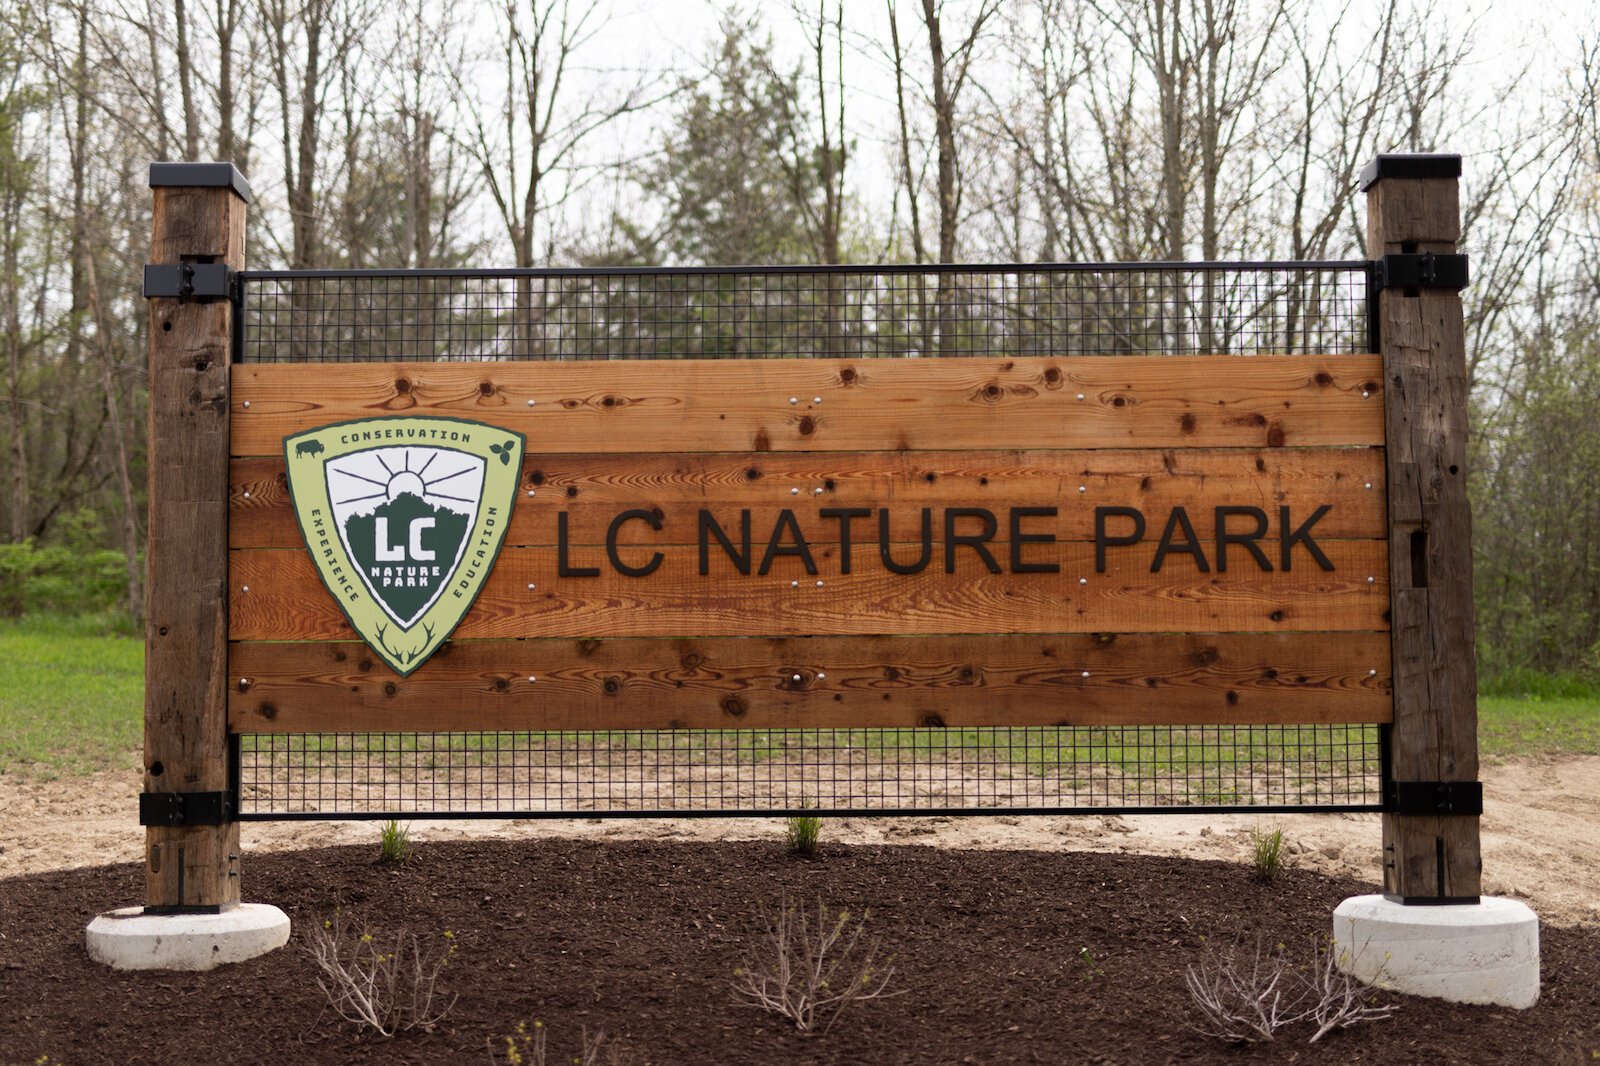 LC Nature Park opened in May 2021 at 9744 Aboite Rd in Roanoke.